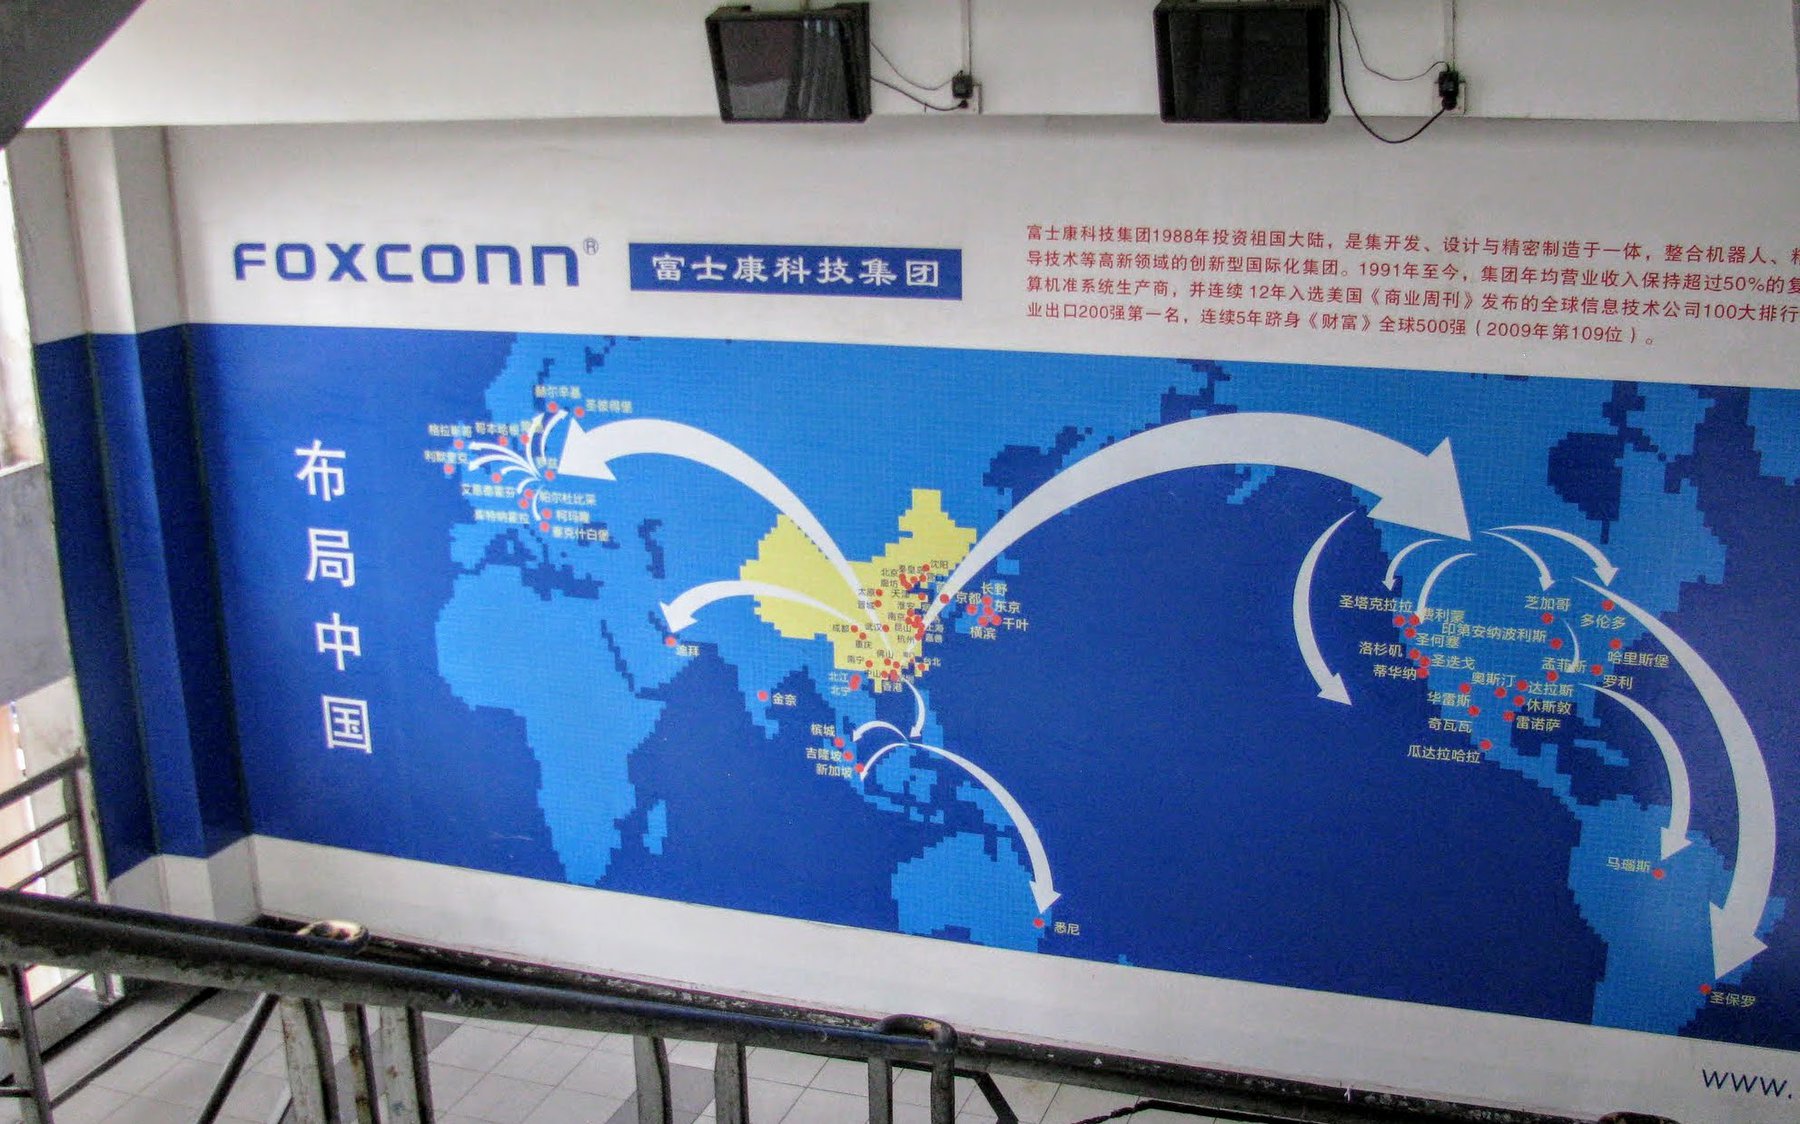 A global map at Foxconn complex in southern China where some 220,000 people worked, during James Fallows' visit there 10 years ago. Photo courtesy of James Fallows.